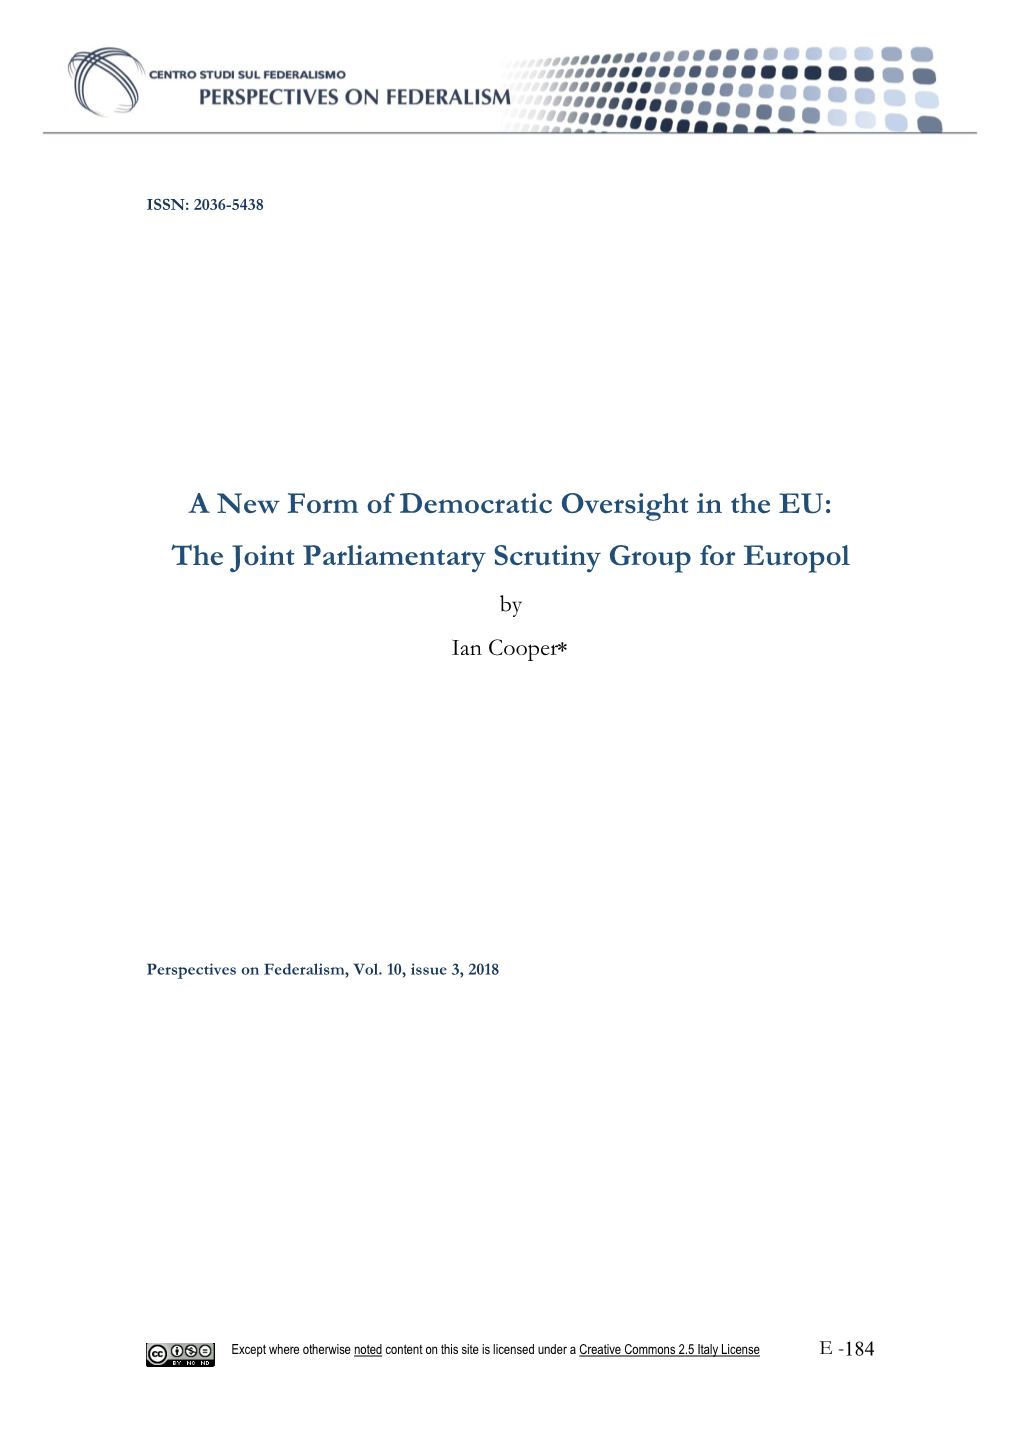 The Joint Parliamentary Scrutiny Group for Europol by Ian Cooper